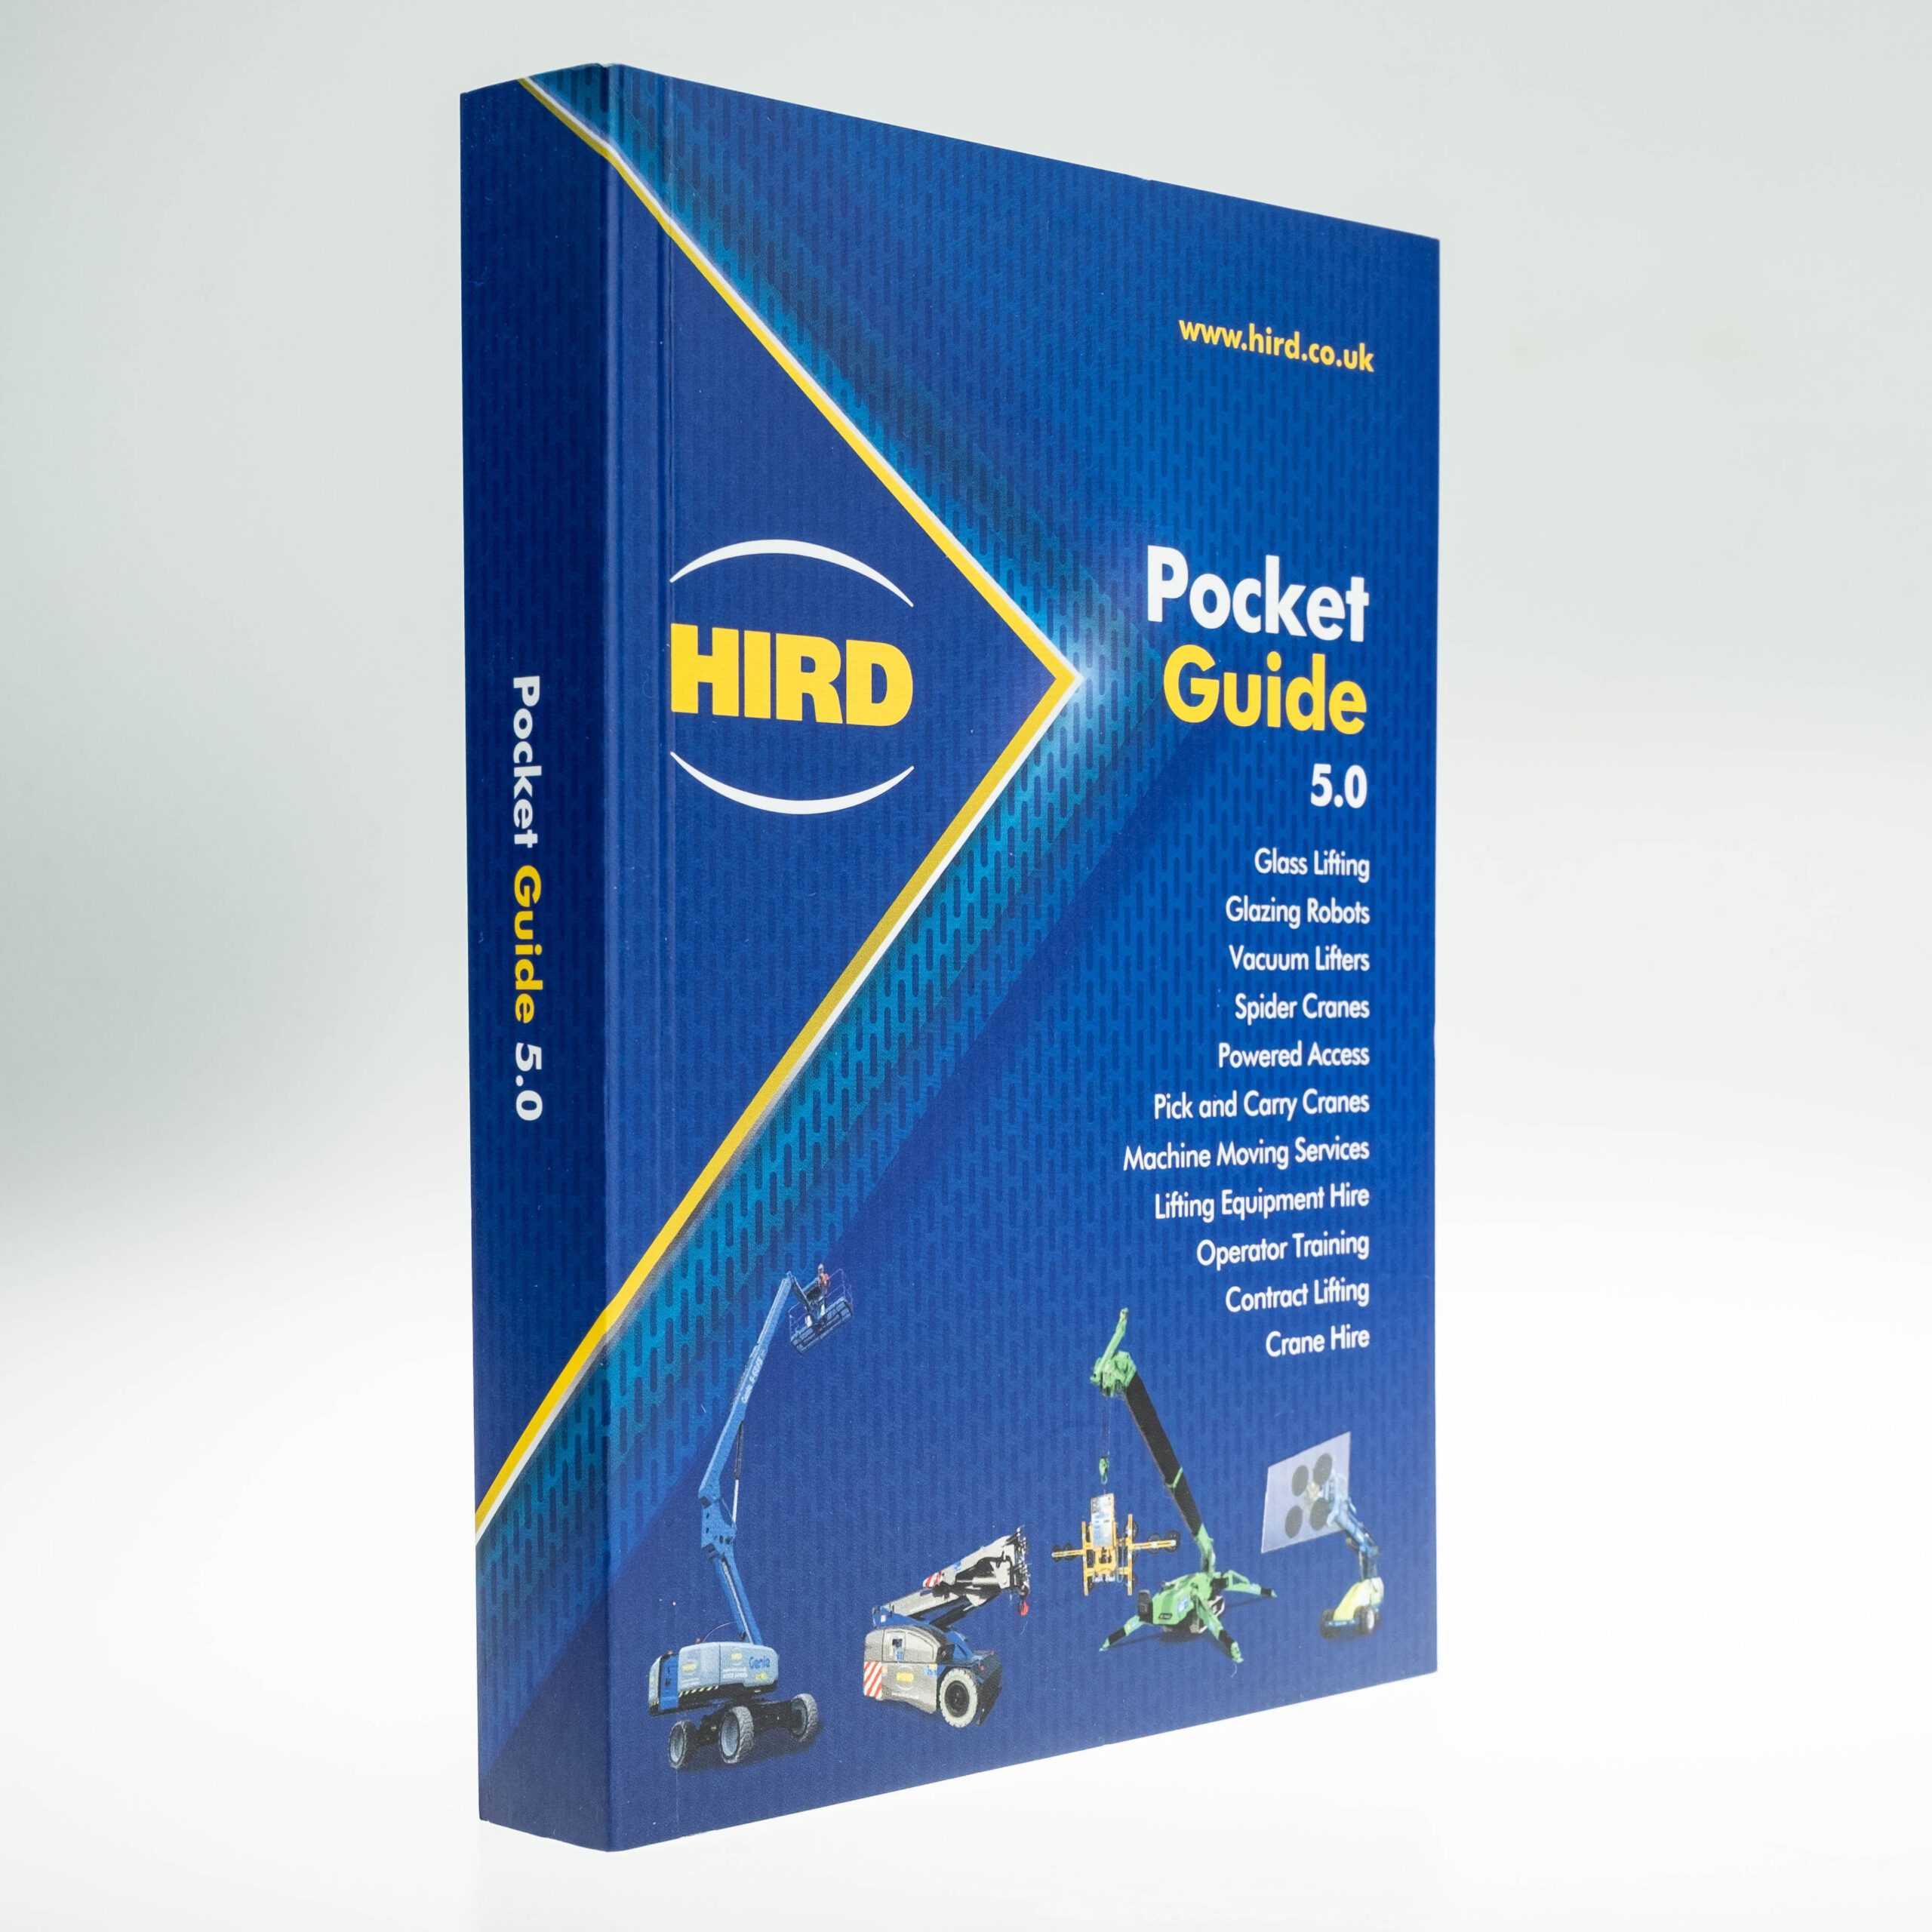 Hird Pocket Guide scaled